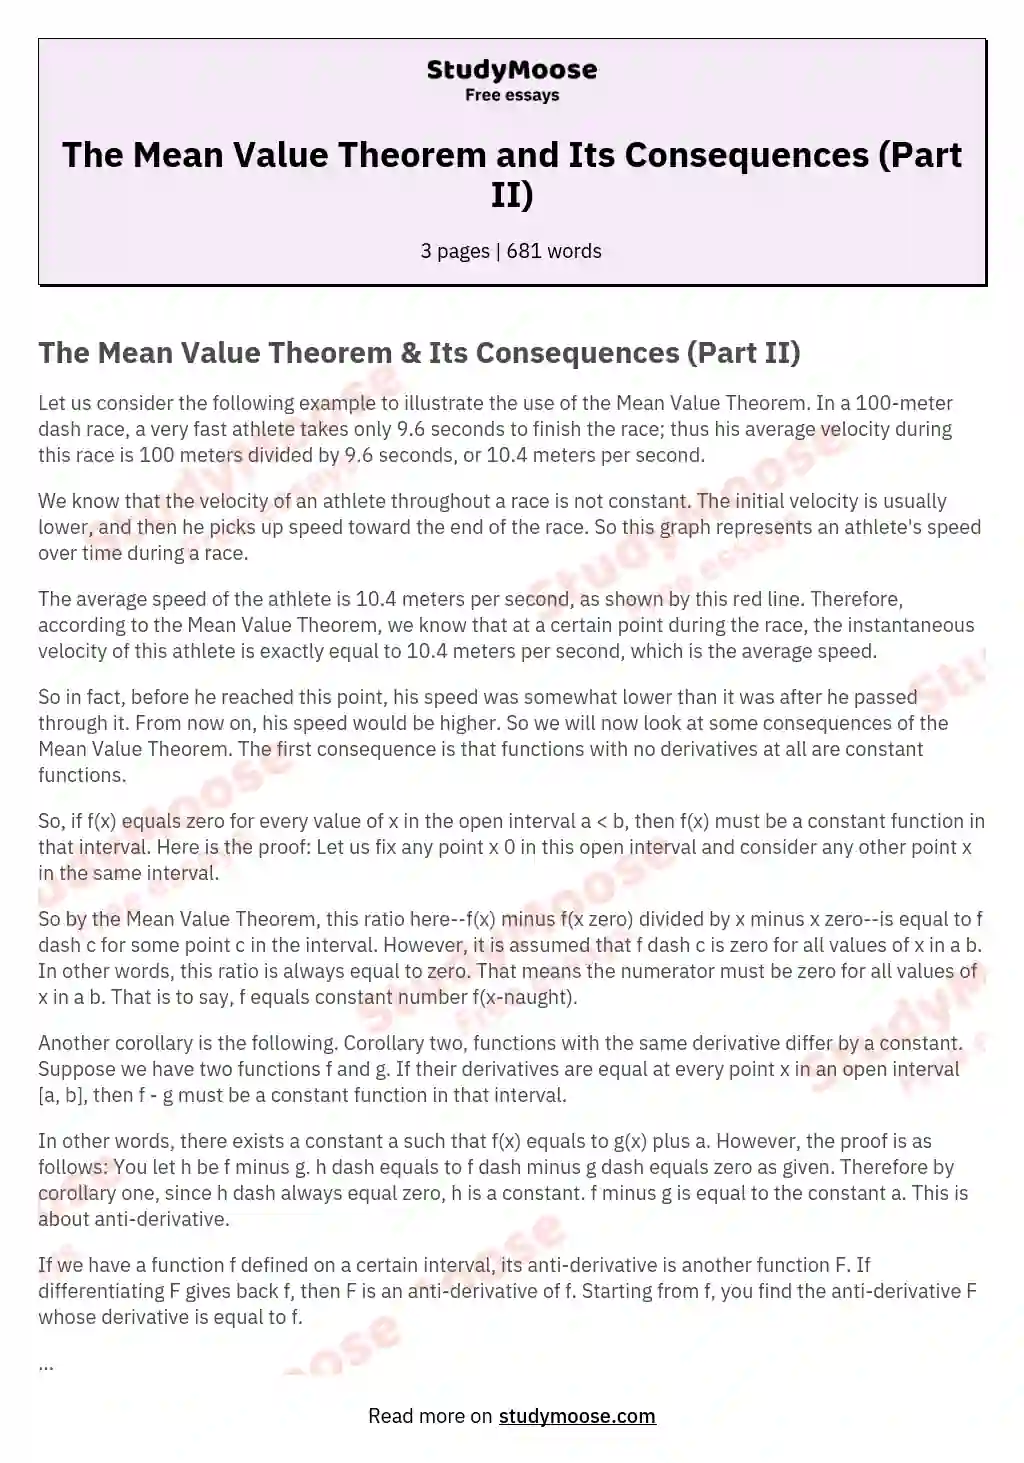 The Mean Value Theorem and Its Consequences (Part II) essay